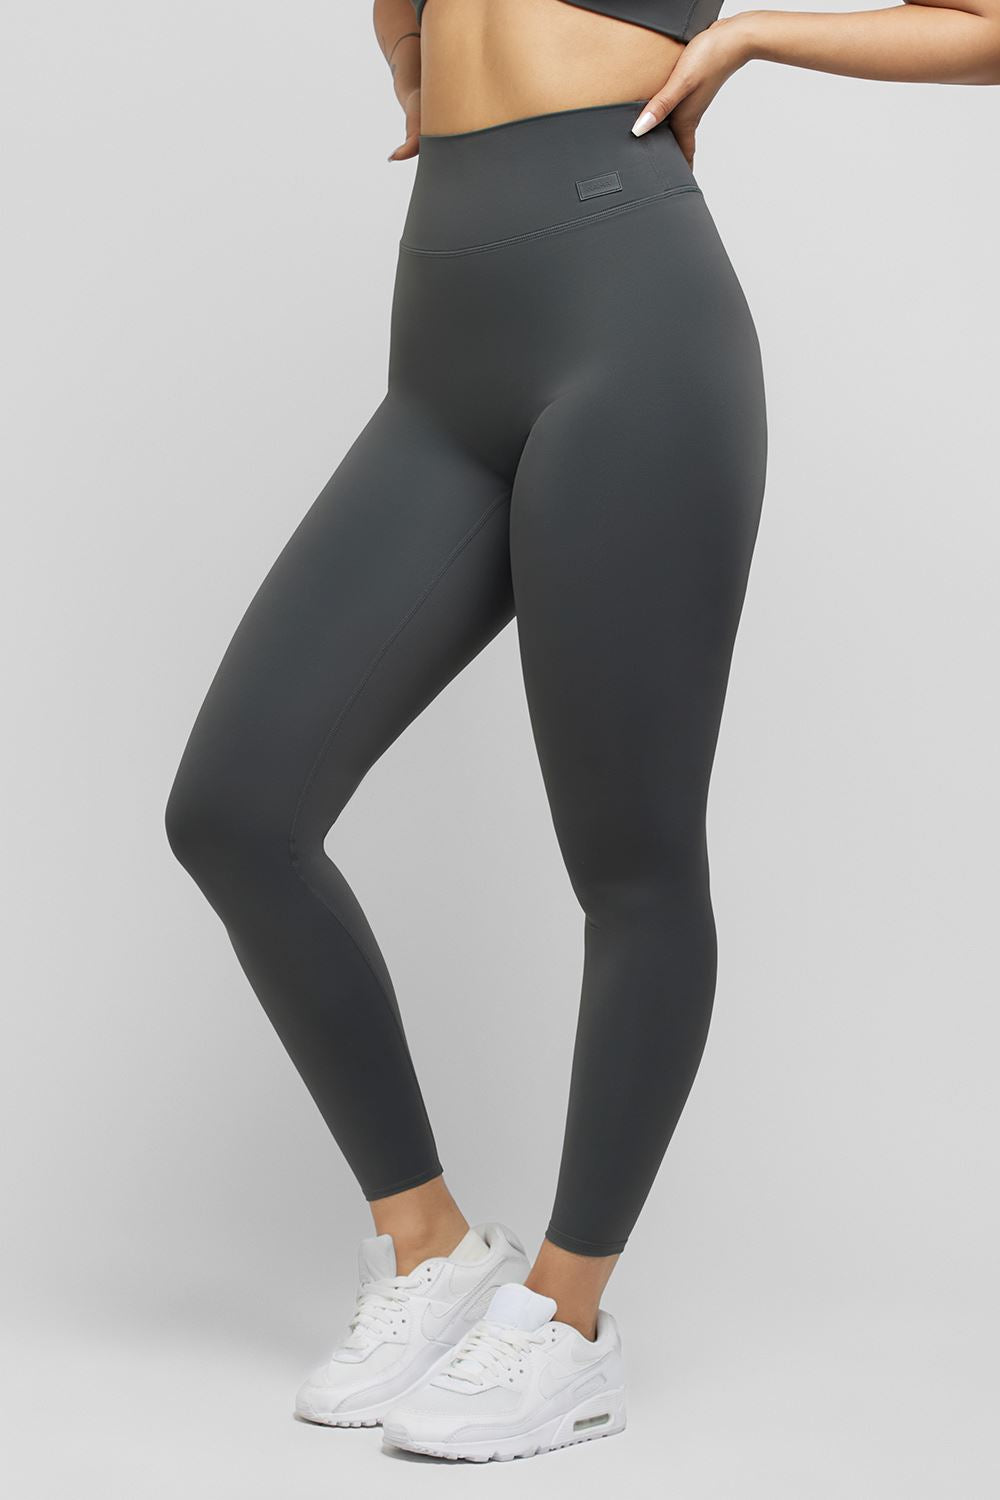 ₪104-High Waisted Leggings For Women Buttery Soft Tummy Control